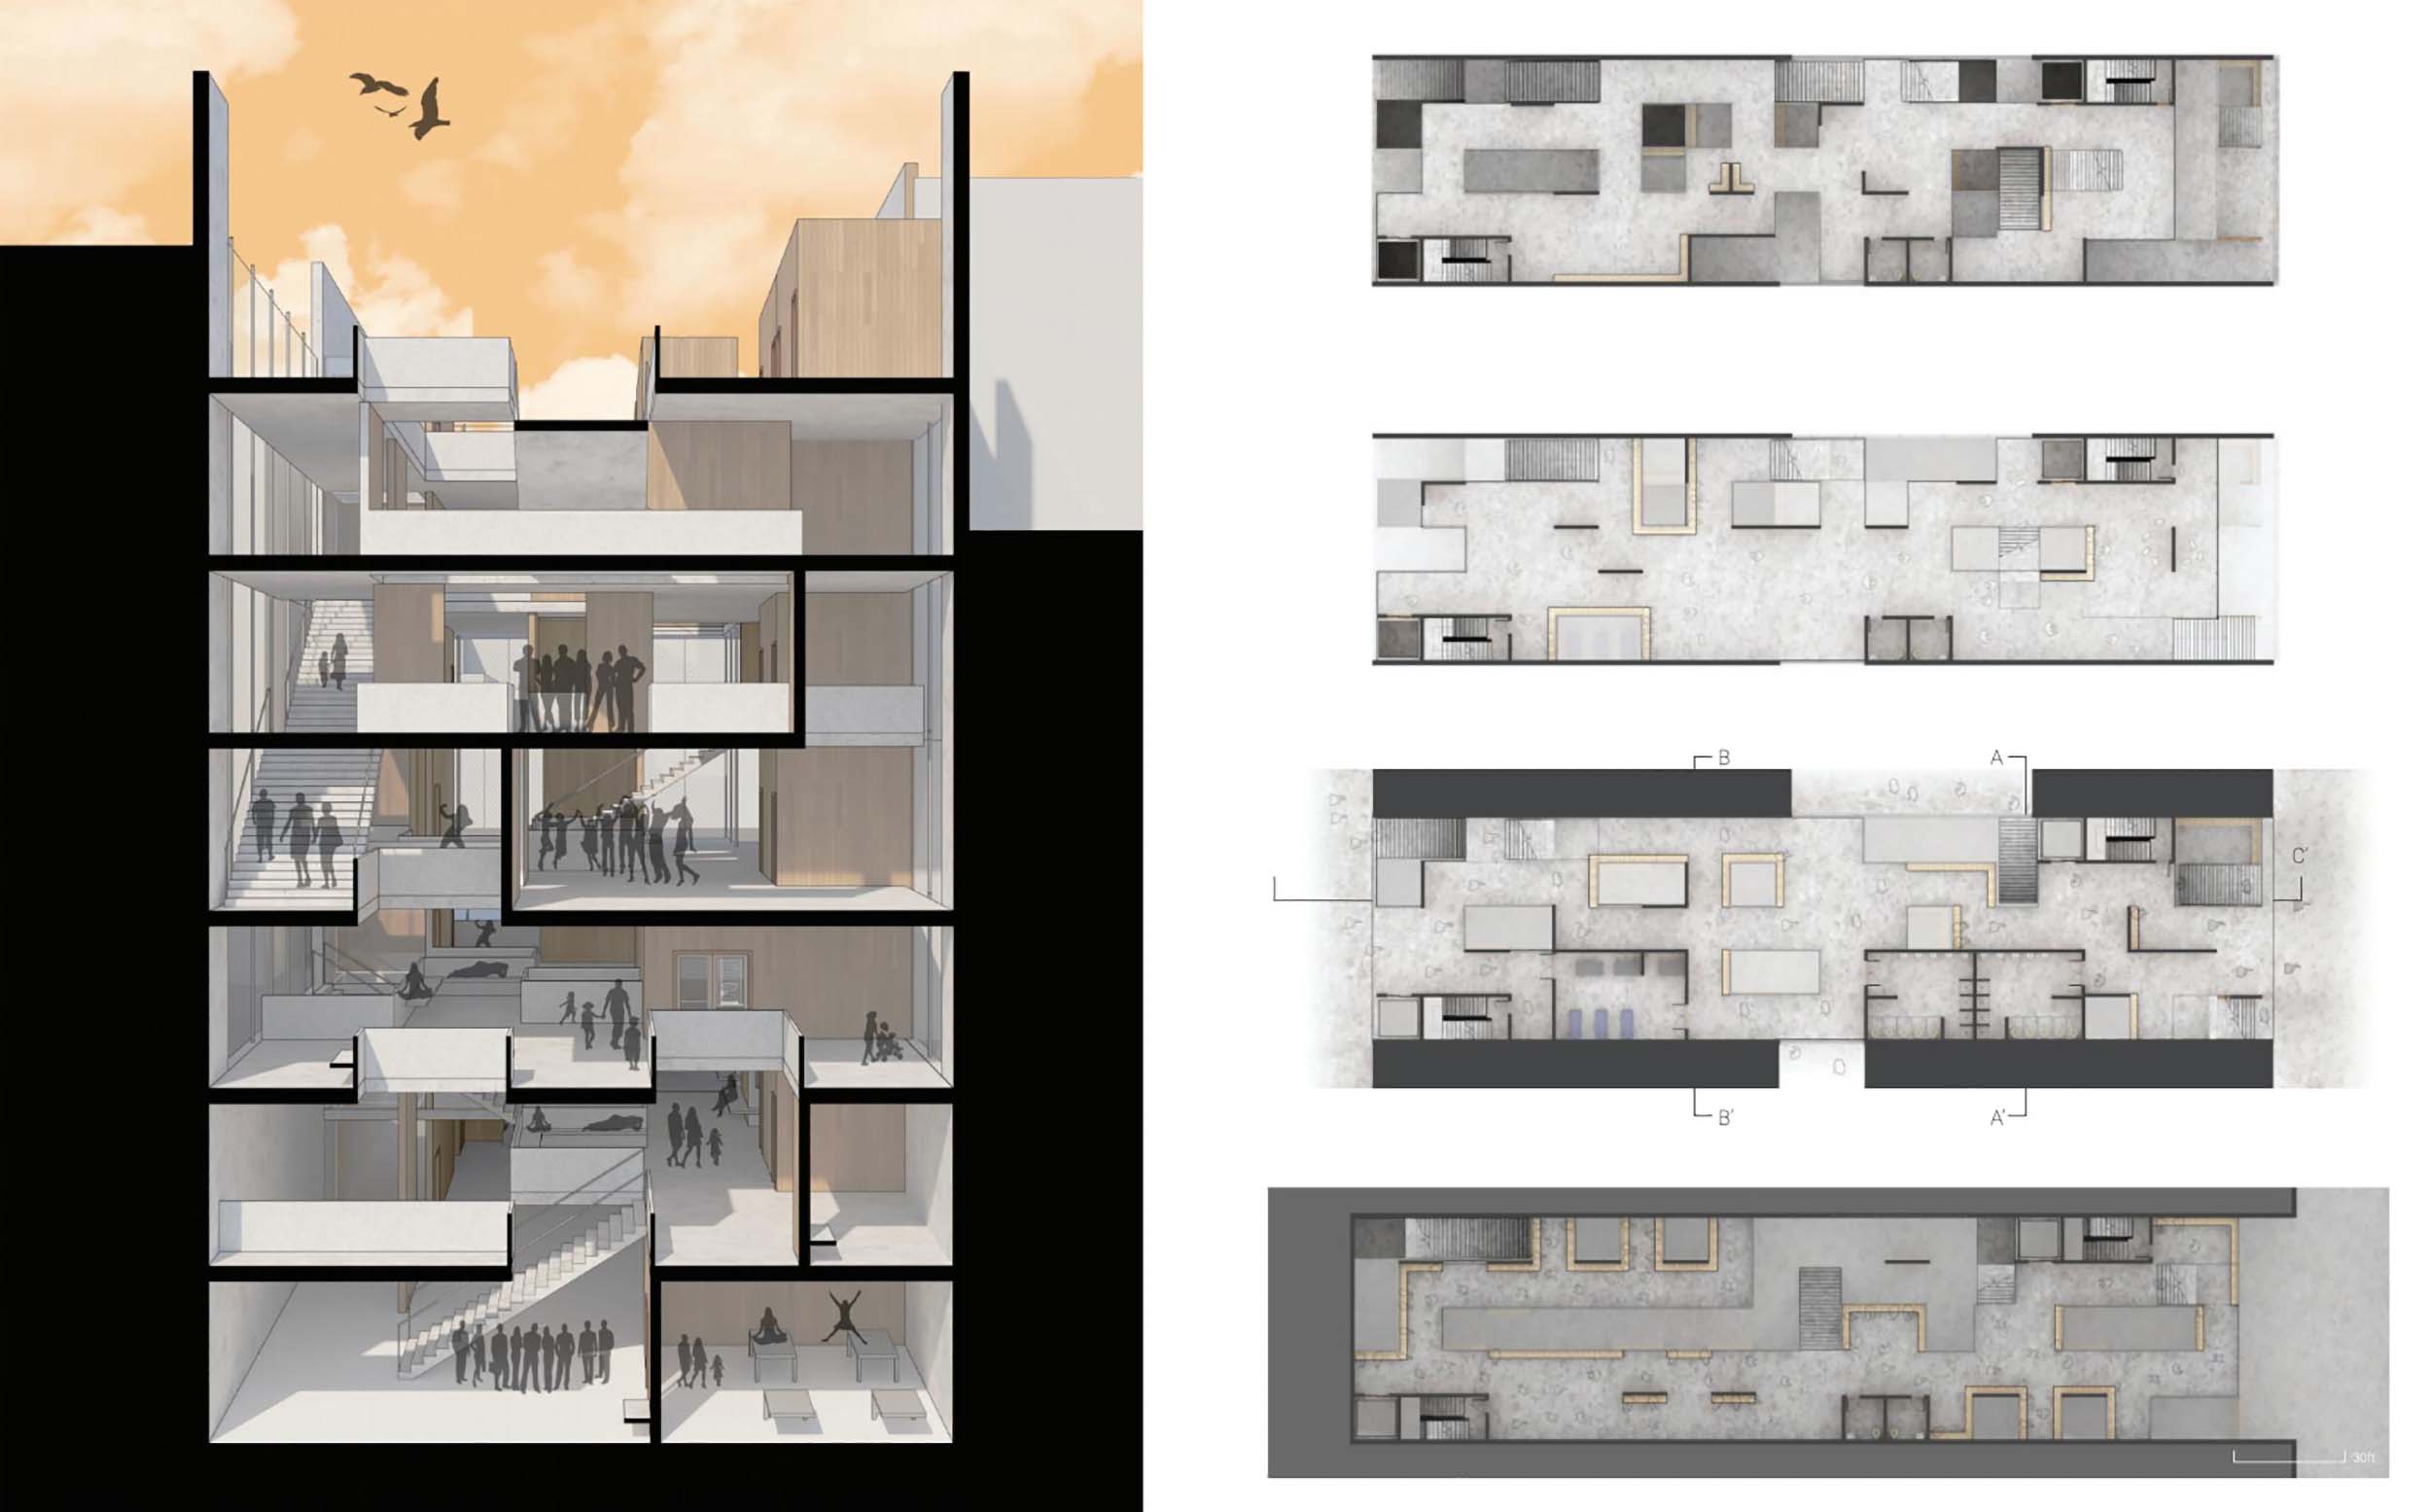 Left: a cross sectional view of a building with people inside Right:floor layout of each floor of a building